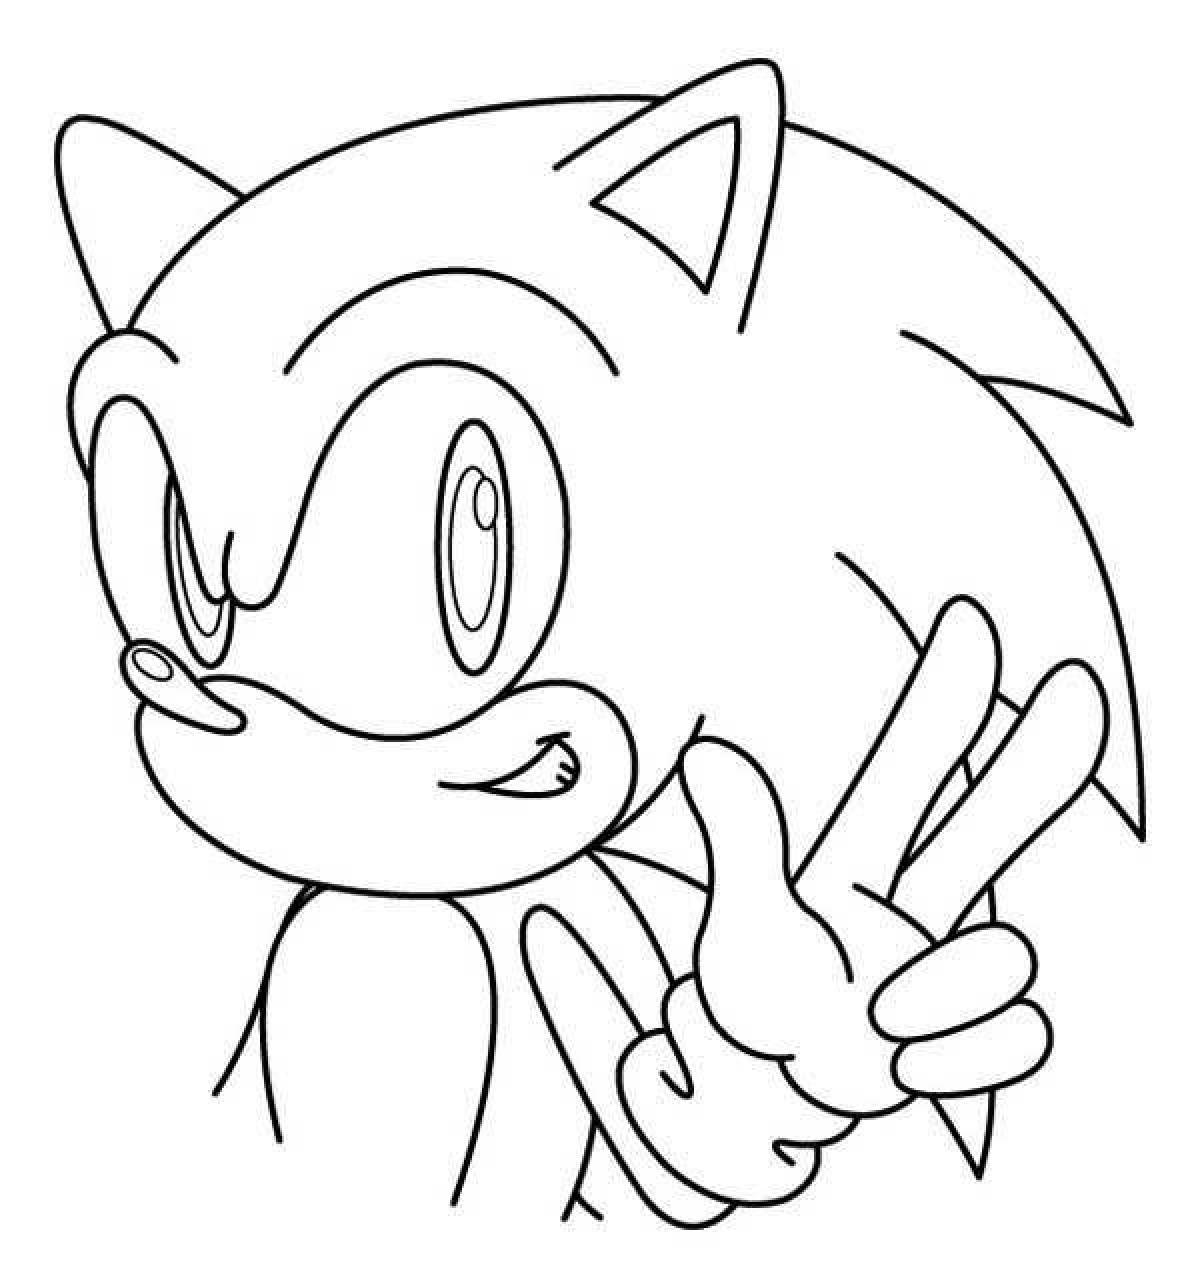 Dreamy sonic x coloring book